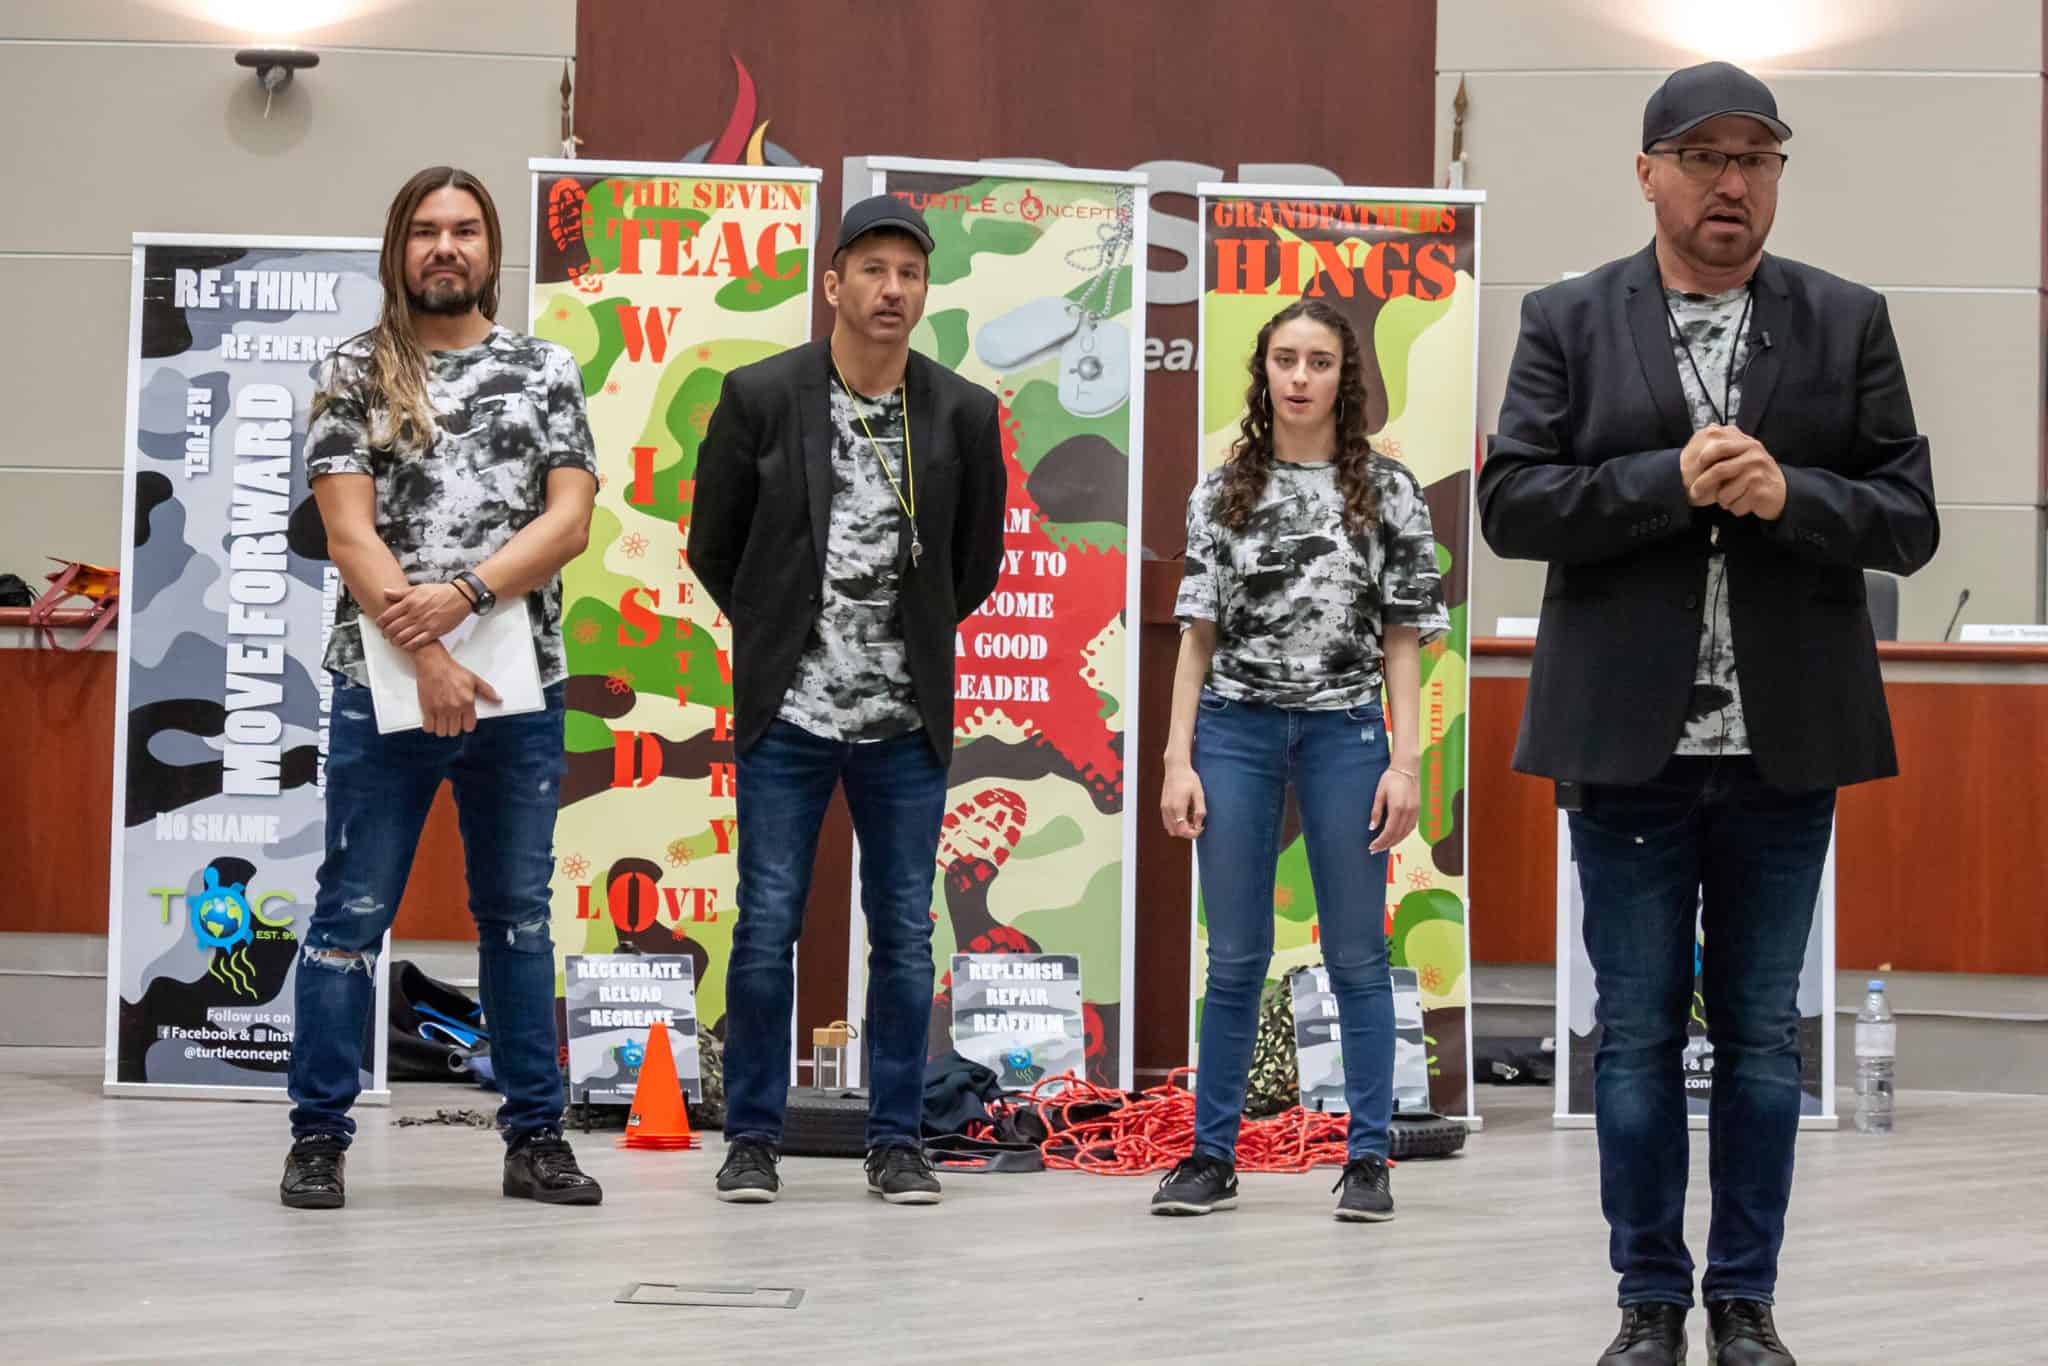 Turtle Concepts helps students who self-identify as First Nation, Métis, or Inuit foster confidence and pride at the annual Indigenous Student Celebration Day. (L-R: Dan Jones, Dr. Scott Eliott, Savannah Soliman and Dave Jones)